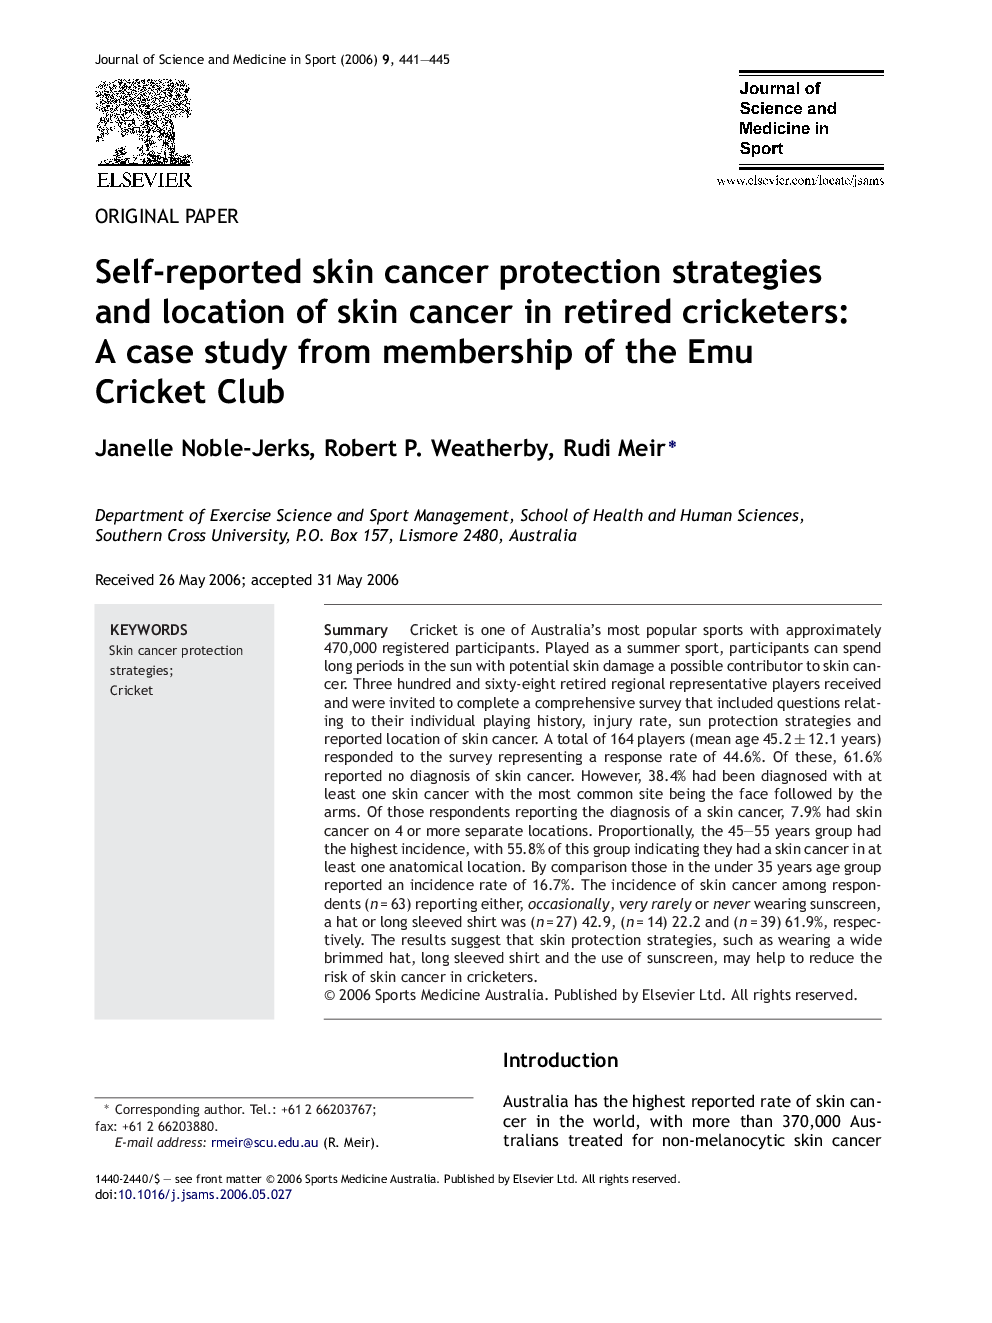 Self-reported skin cancer protection strategies and location of skin cancer in retired cricketers: A case study from membership of the Emu Cricket Club